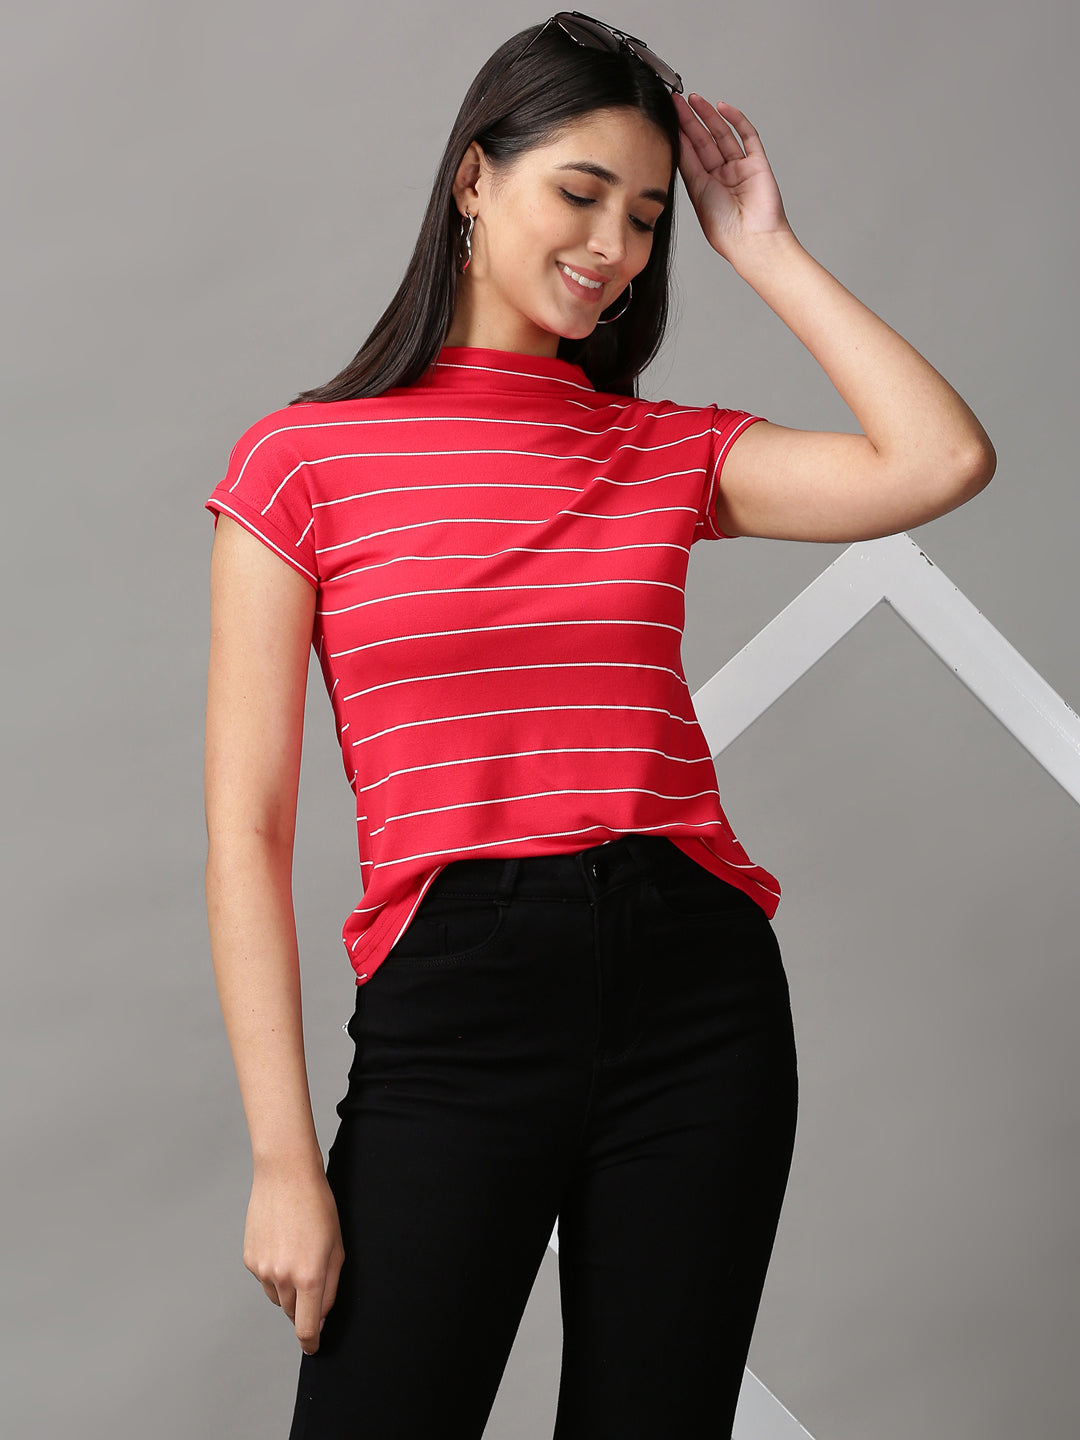 Women's Red Striped Top